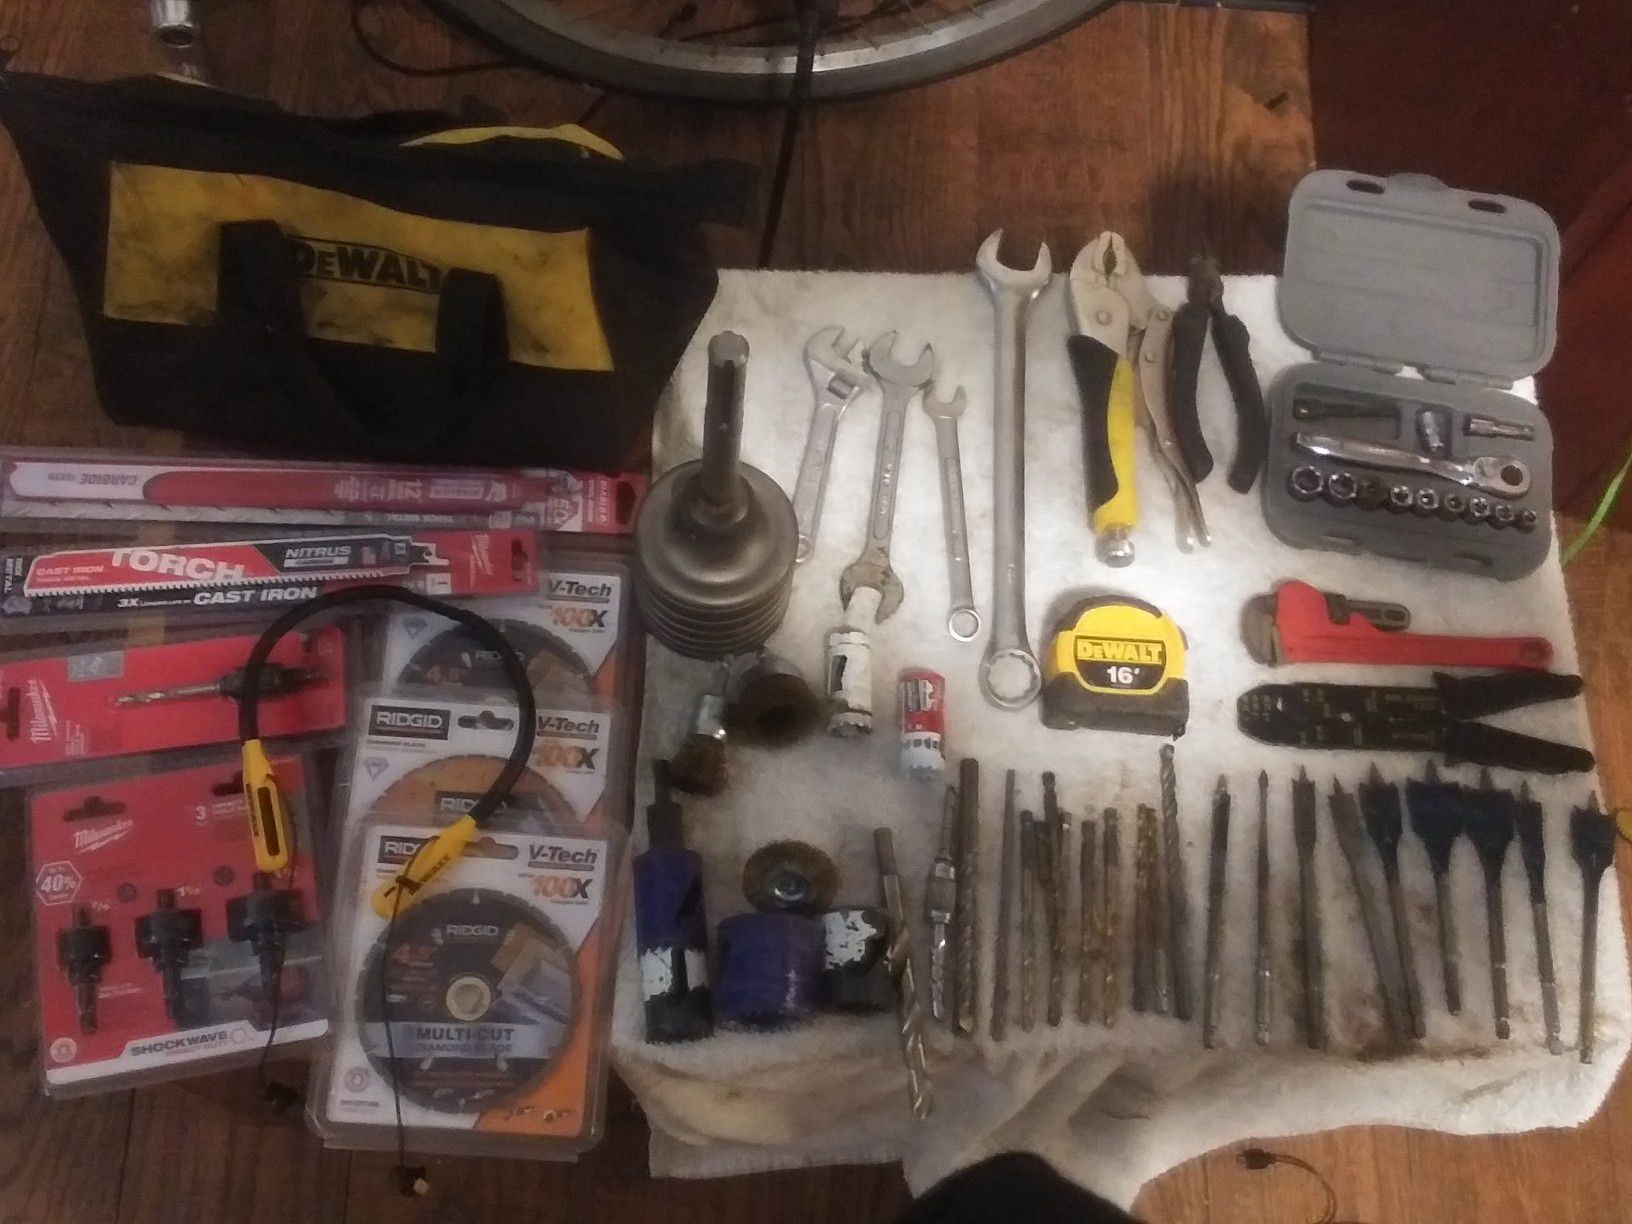 New and used tools for sale